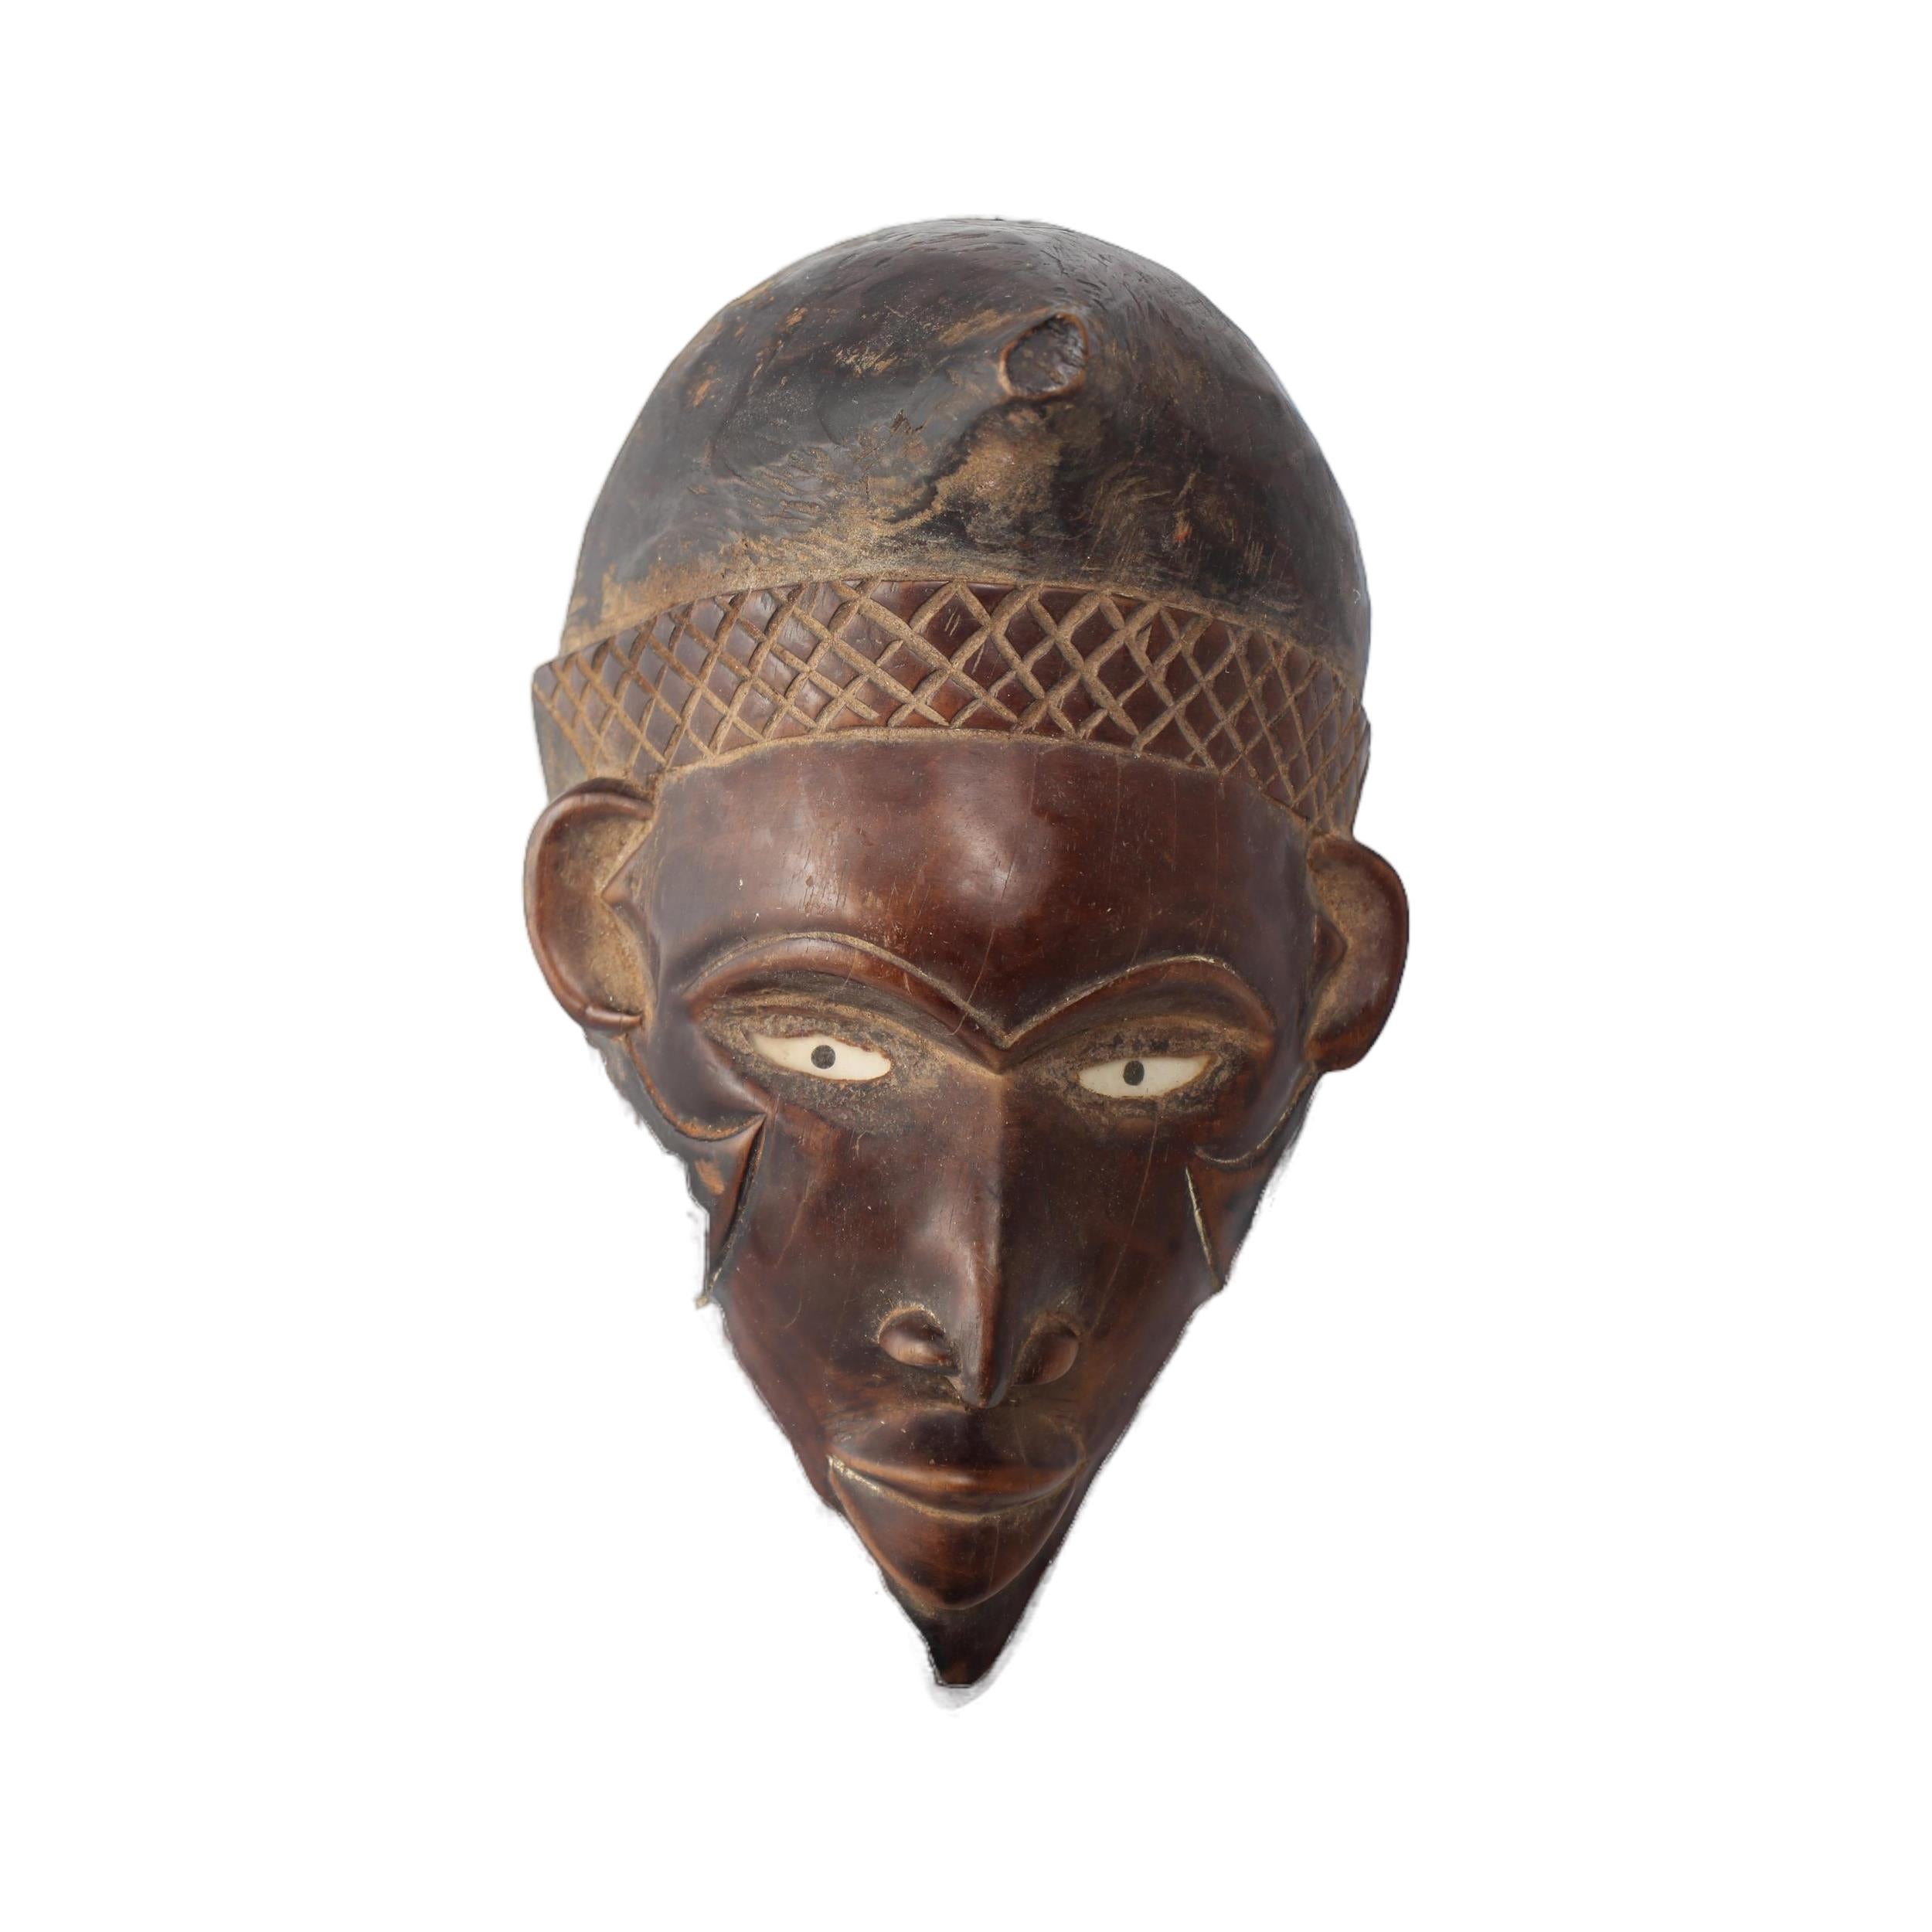 Pende Tribe Mask ~9.4" Tall